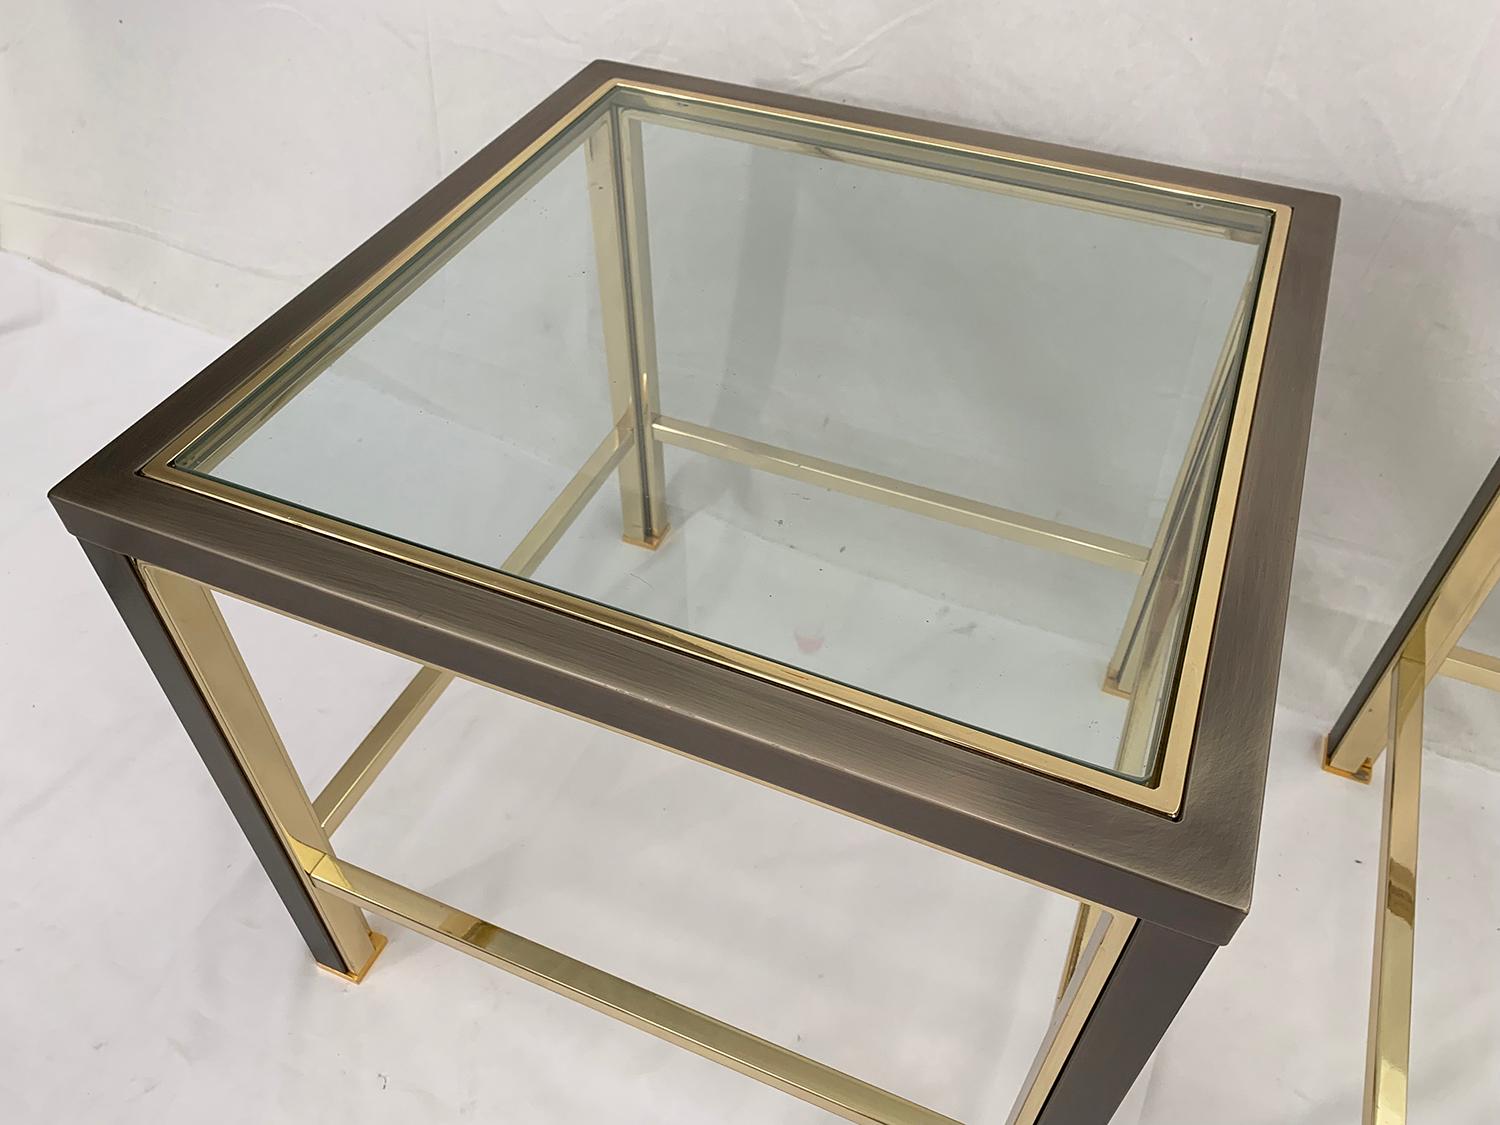 Belgian Pair of Brushed Steel and Brass Side Tables from Belgo Chrome, 1980s